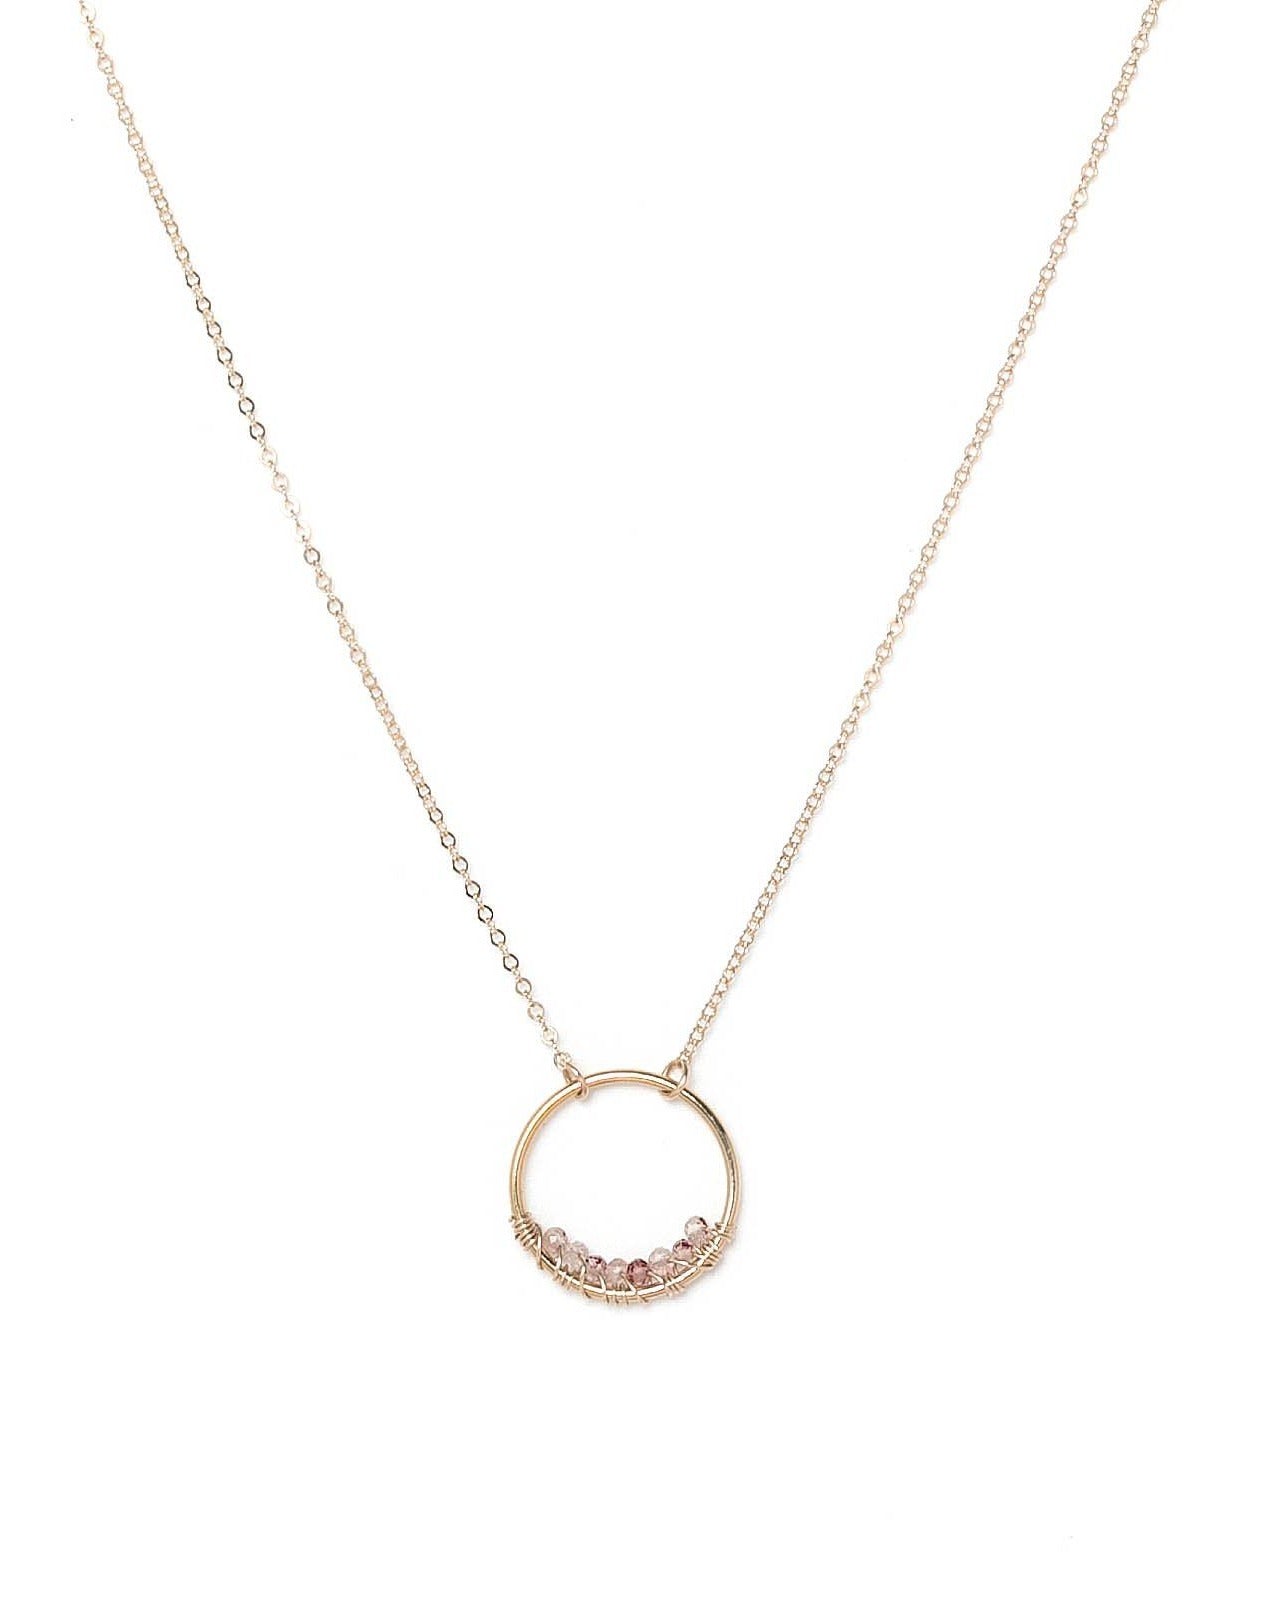 Curra Necklace by KOZAKH. A 16 to 18 inch adjustable length necklace in 14K Gold Filled, featuring a ring with 2mm faceted round Cherry Quartz gems.